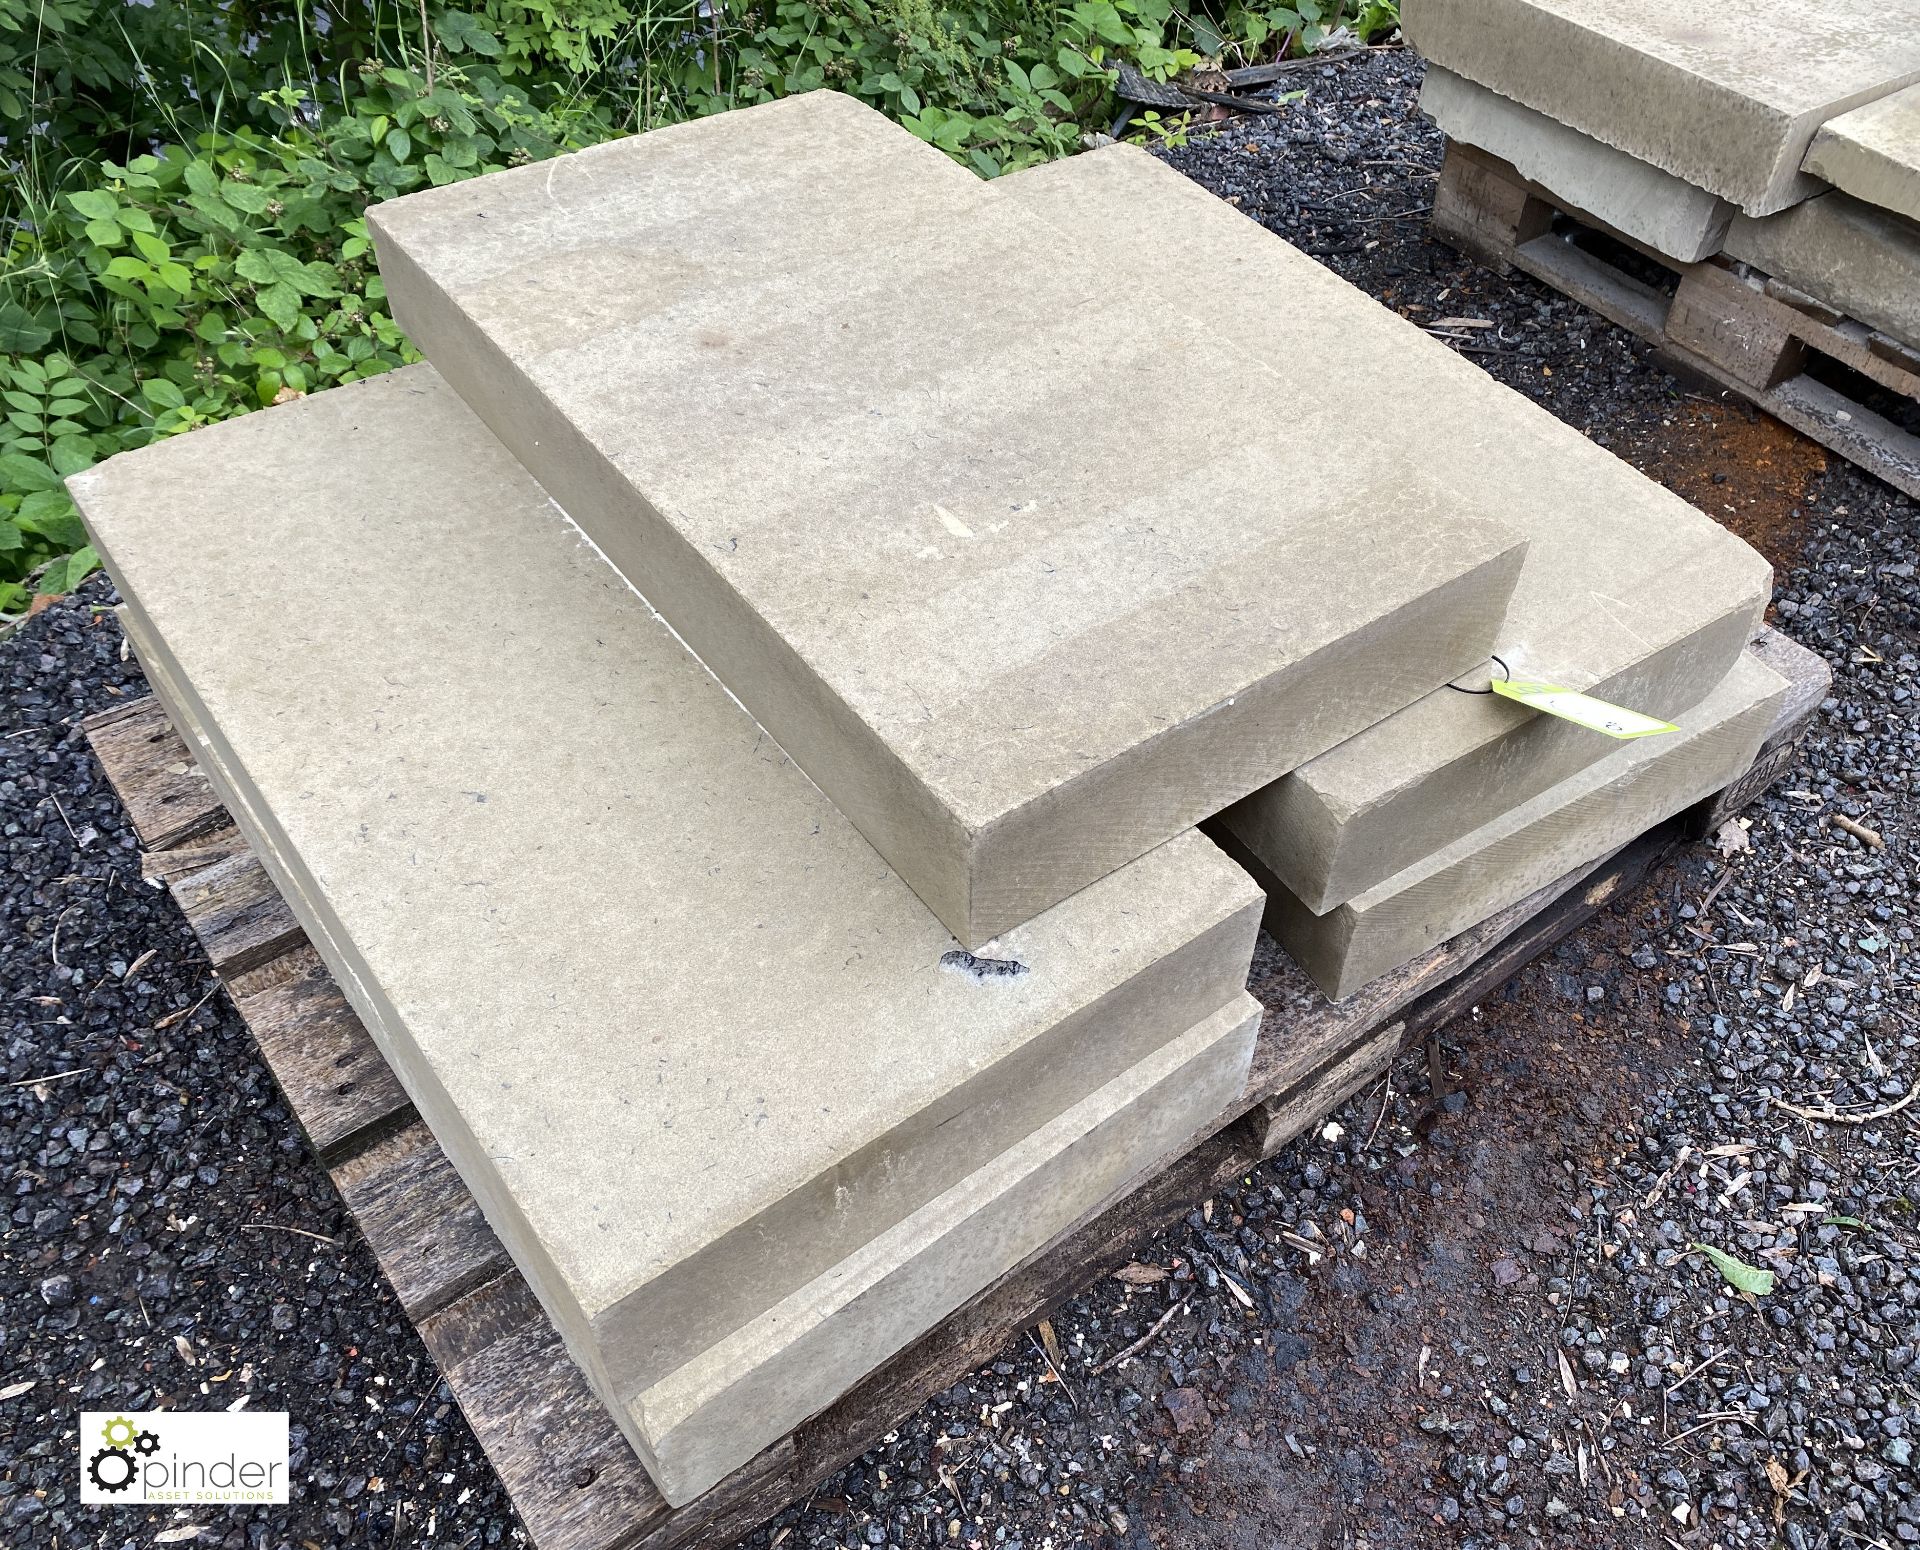 5 Yorkshire stone Quoin Slabs, approx. 800mm x 430mm x 105mm, to pallet (LOCATION: Woodhead Road)